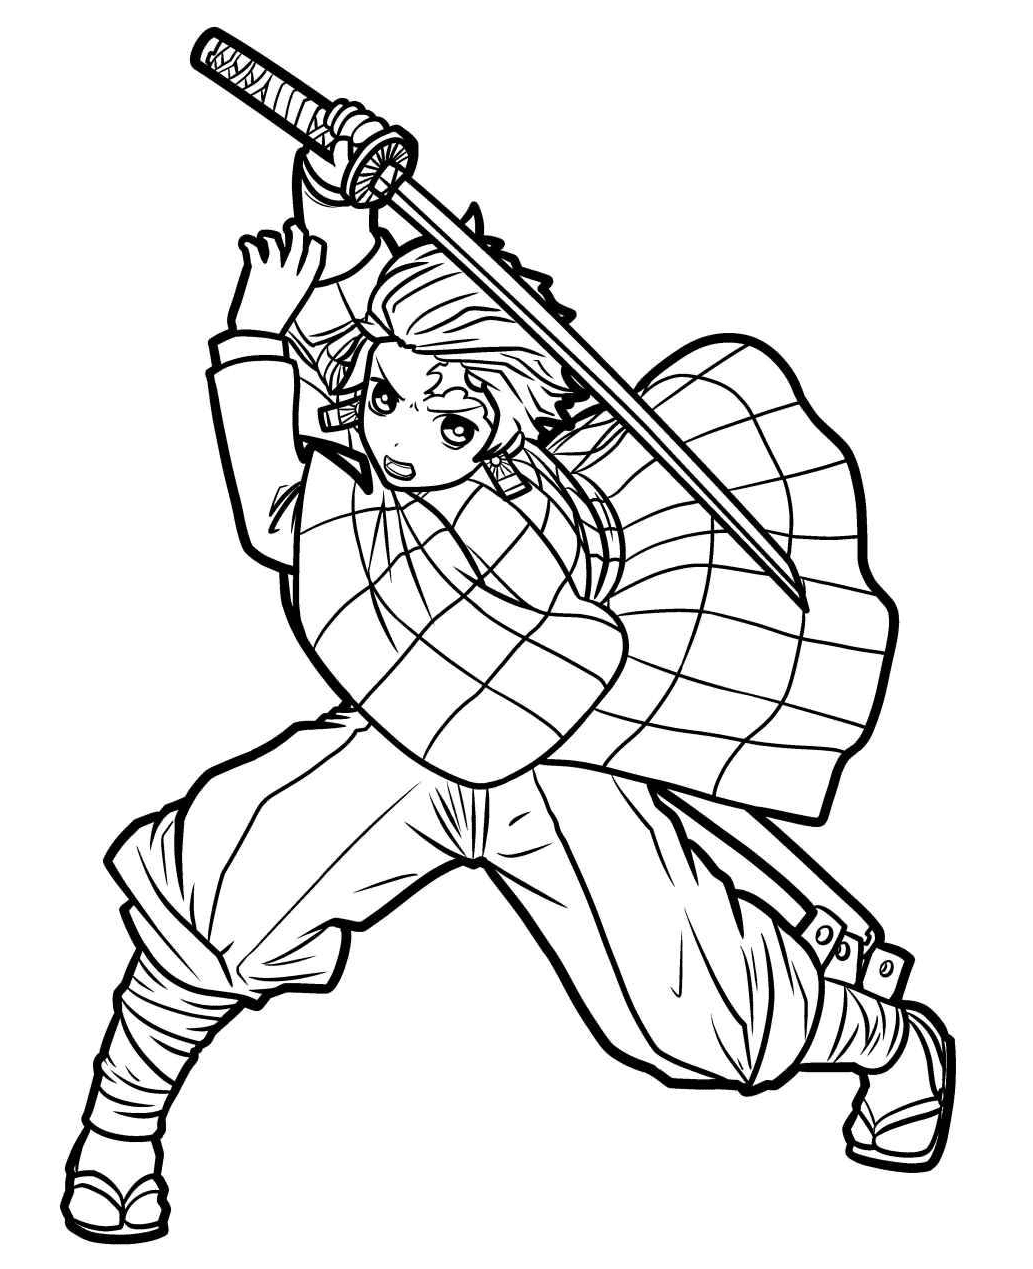 Kamado Tanjiro with Sword Coloring Pages